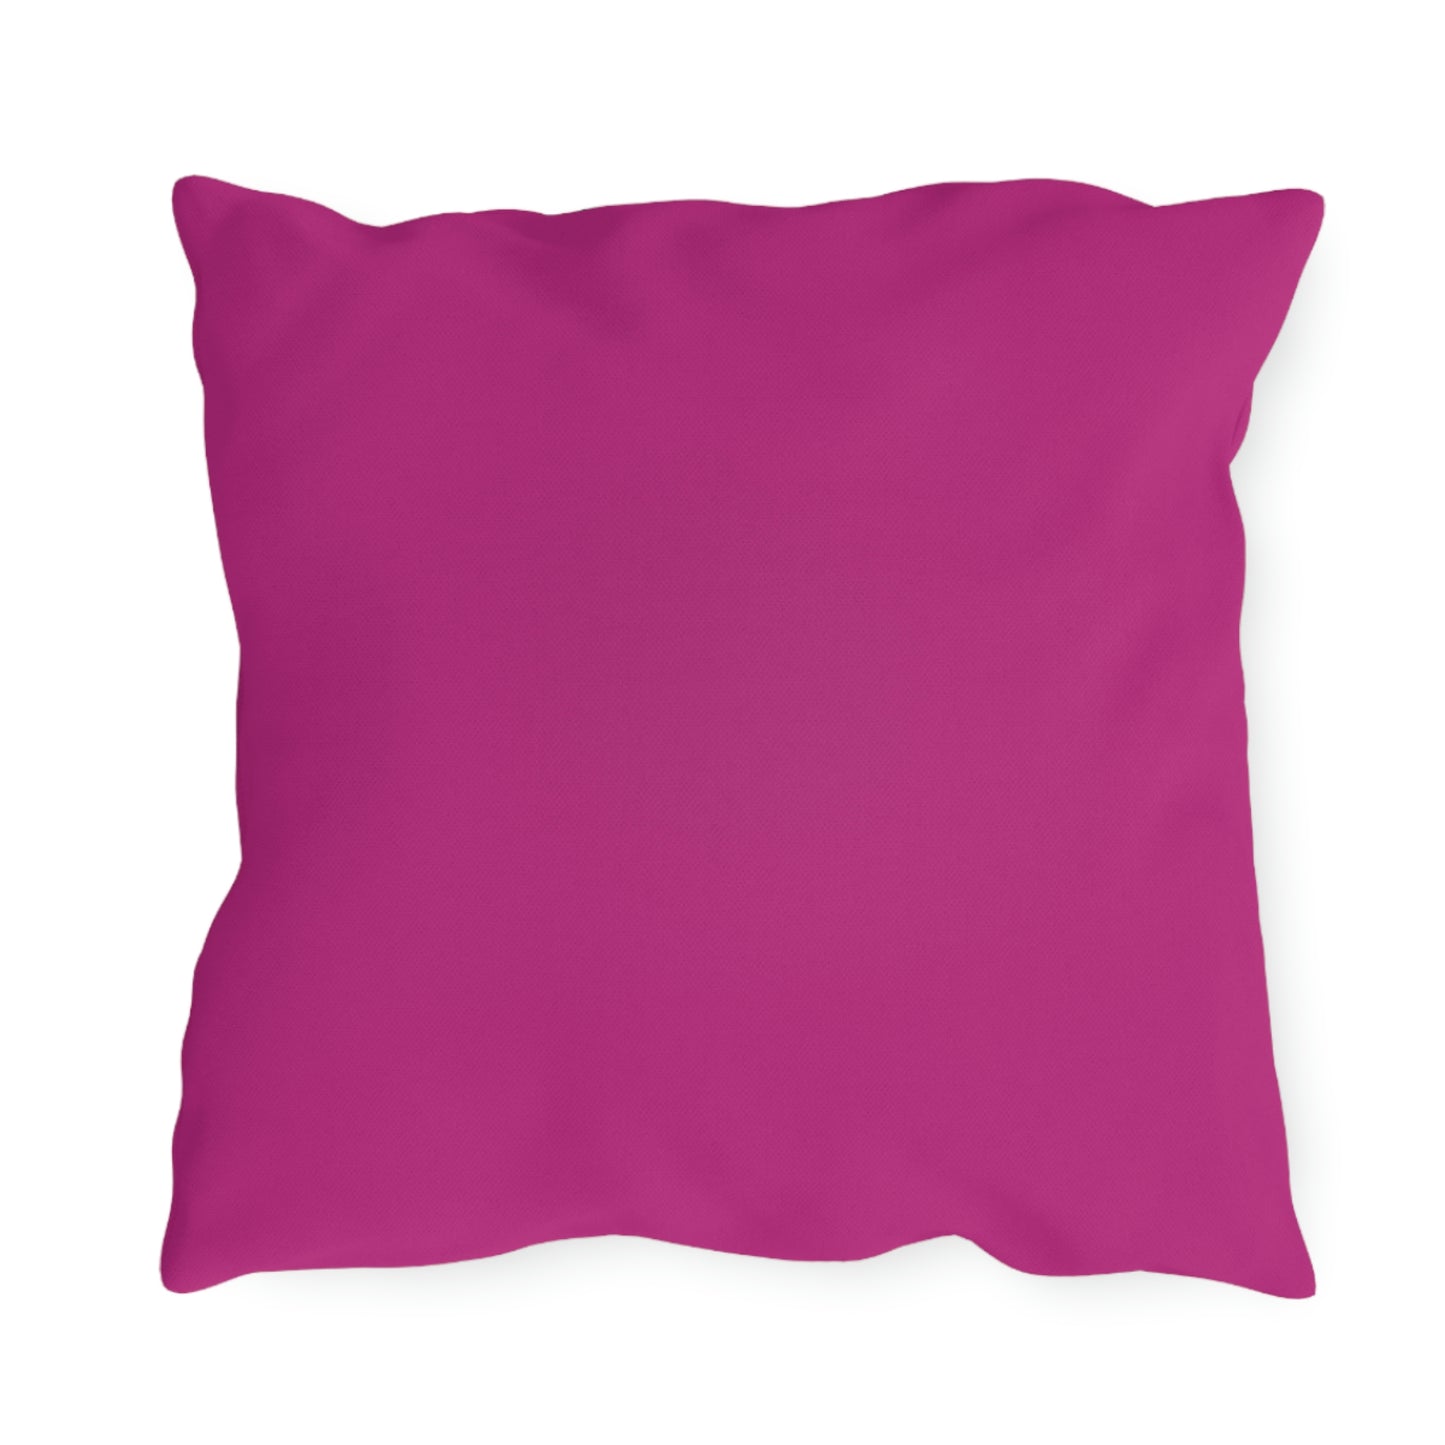 Bright Pink, Gold, Orange & Fuchsia Pillow COVER ONLY for Outdoor Living, Firepit Seating, Porch Swings, Keep Pillows Clean, Attractive Decor